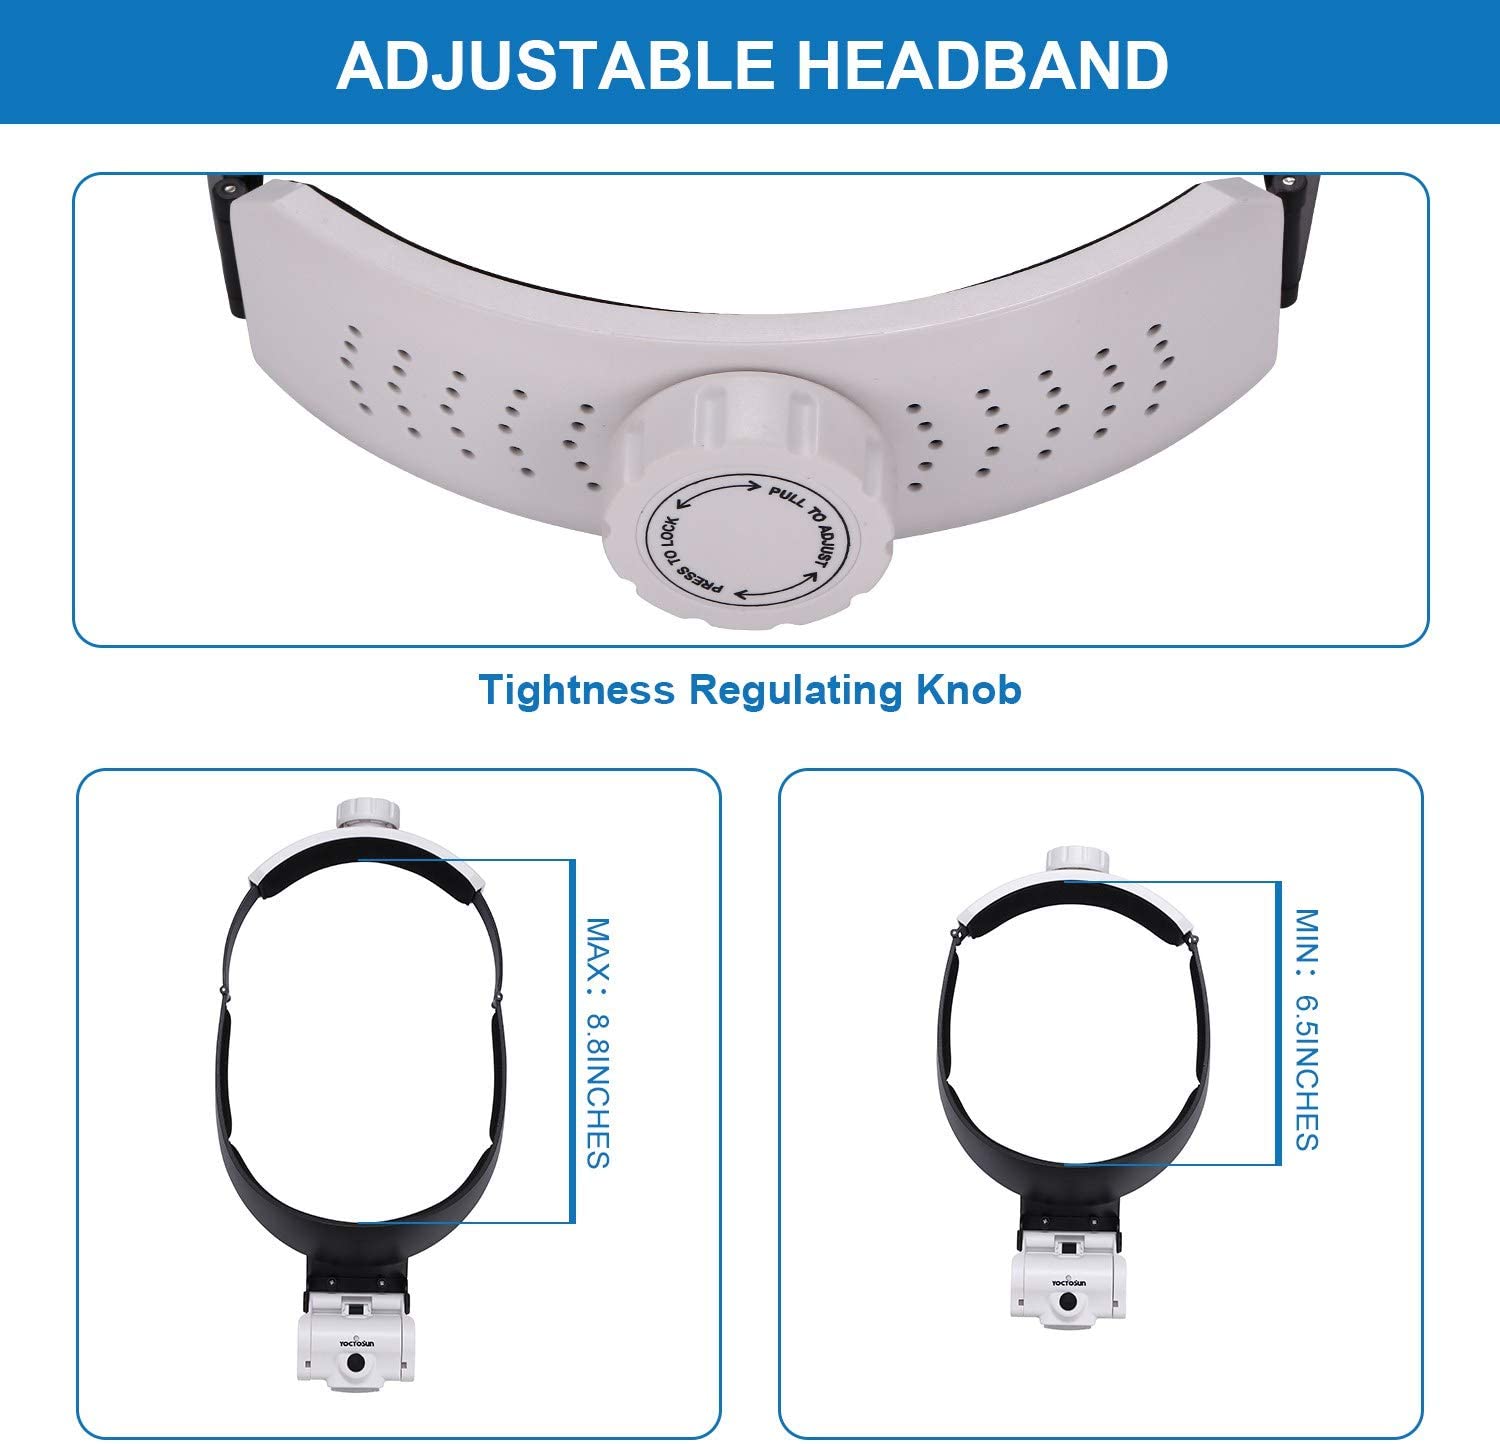 YOCTOSUN Rechargeable Headband Magnifier with 2 LED Lights and 5 Detachable Lenses 1X,1.5X,2X,2.5X,3.5X, Hands-Free Head Magnifying Glasses for Close Work, Jewelry Work, Watch Repair, Arts & Crafts